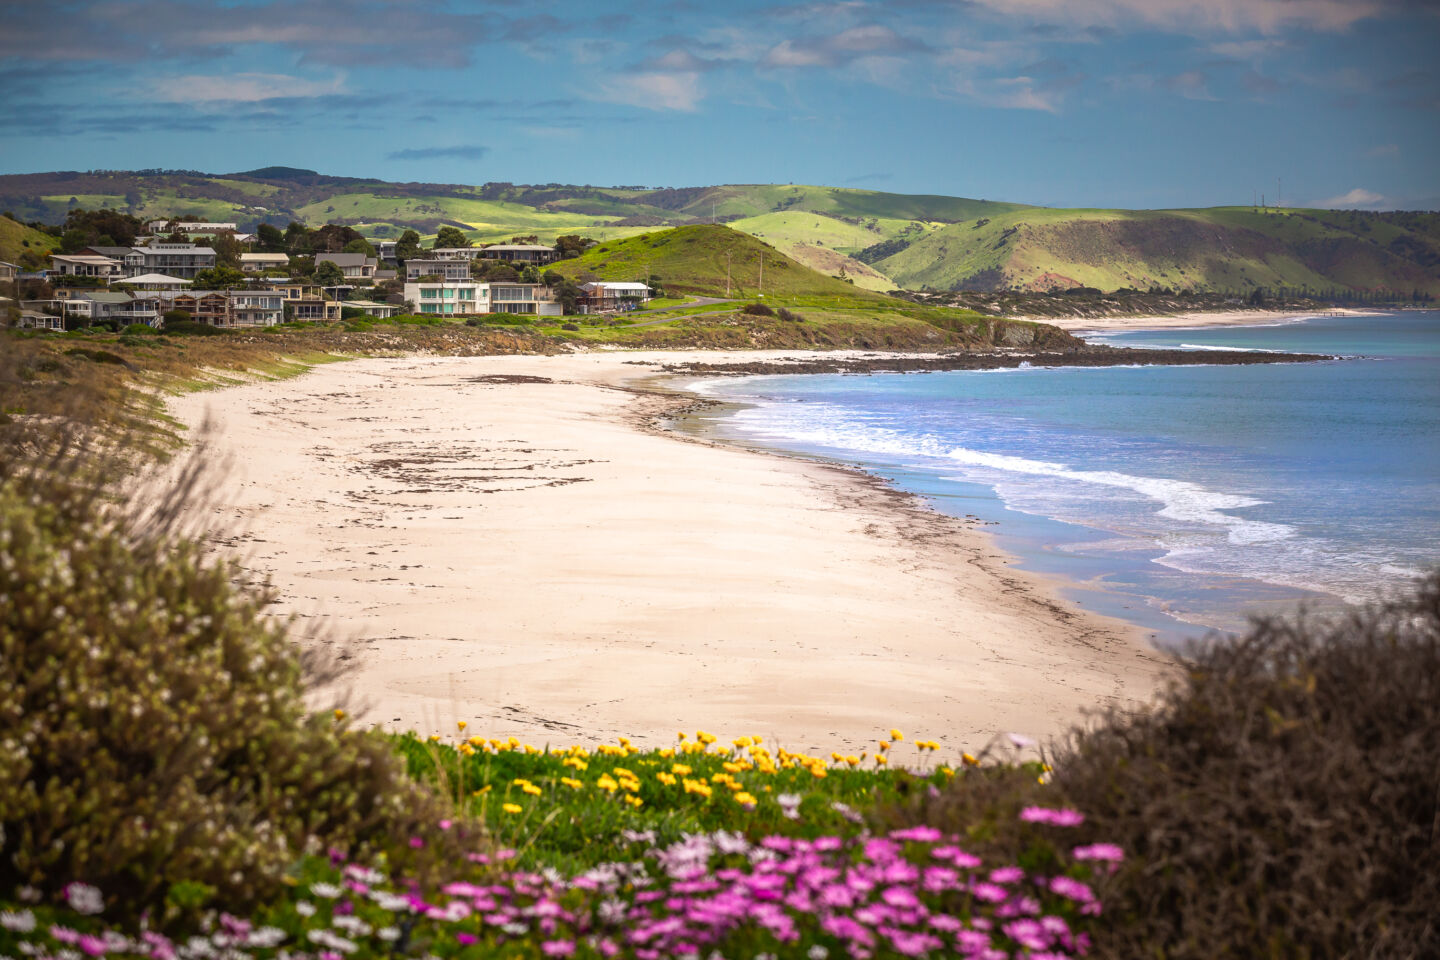 Image of beach and town along the South Australian coast.